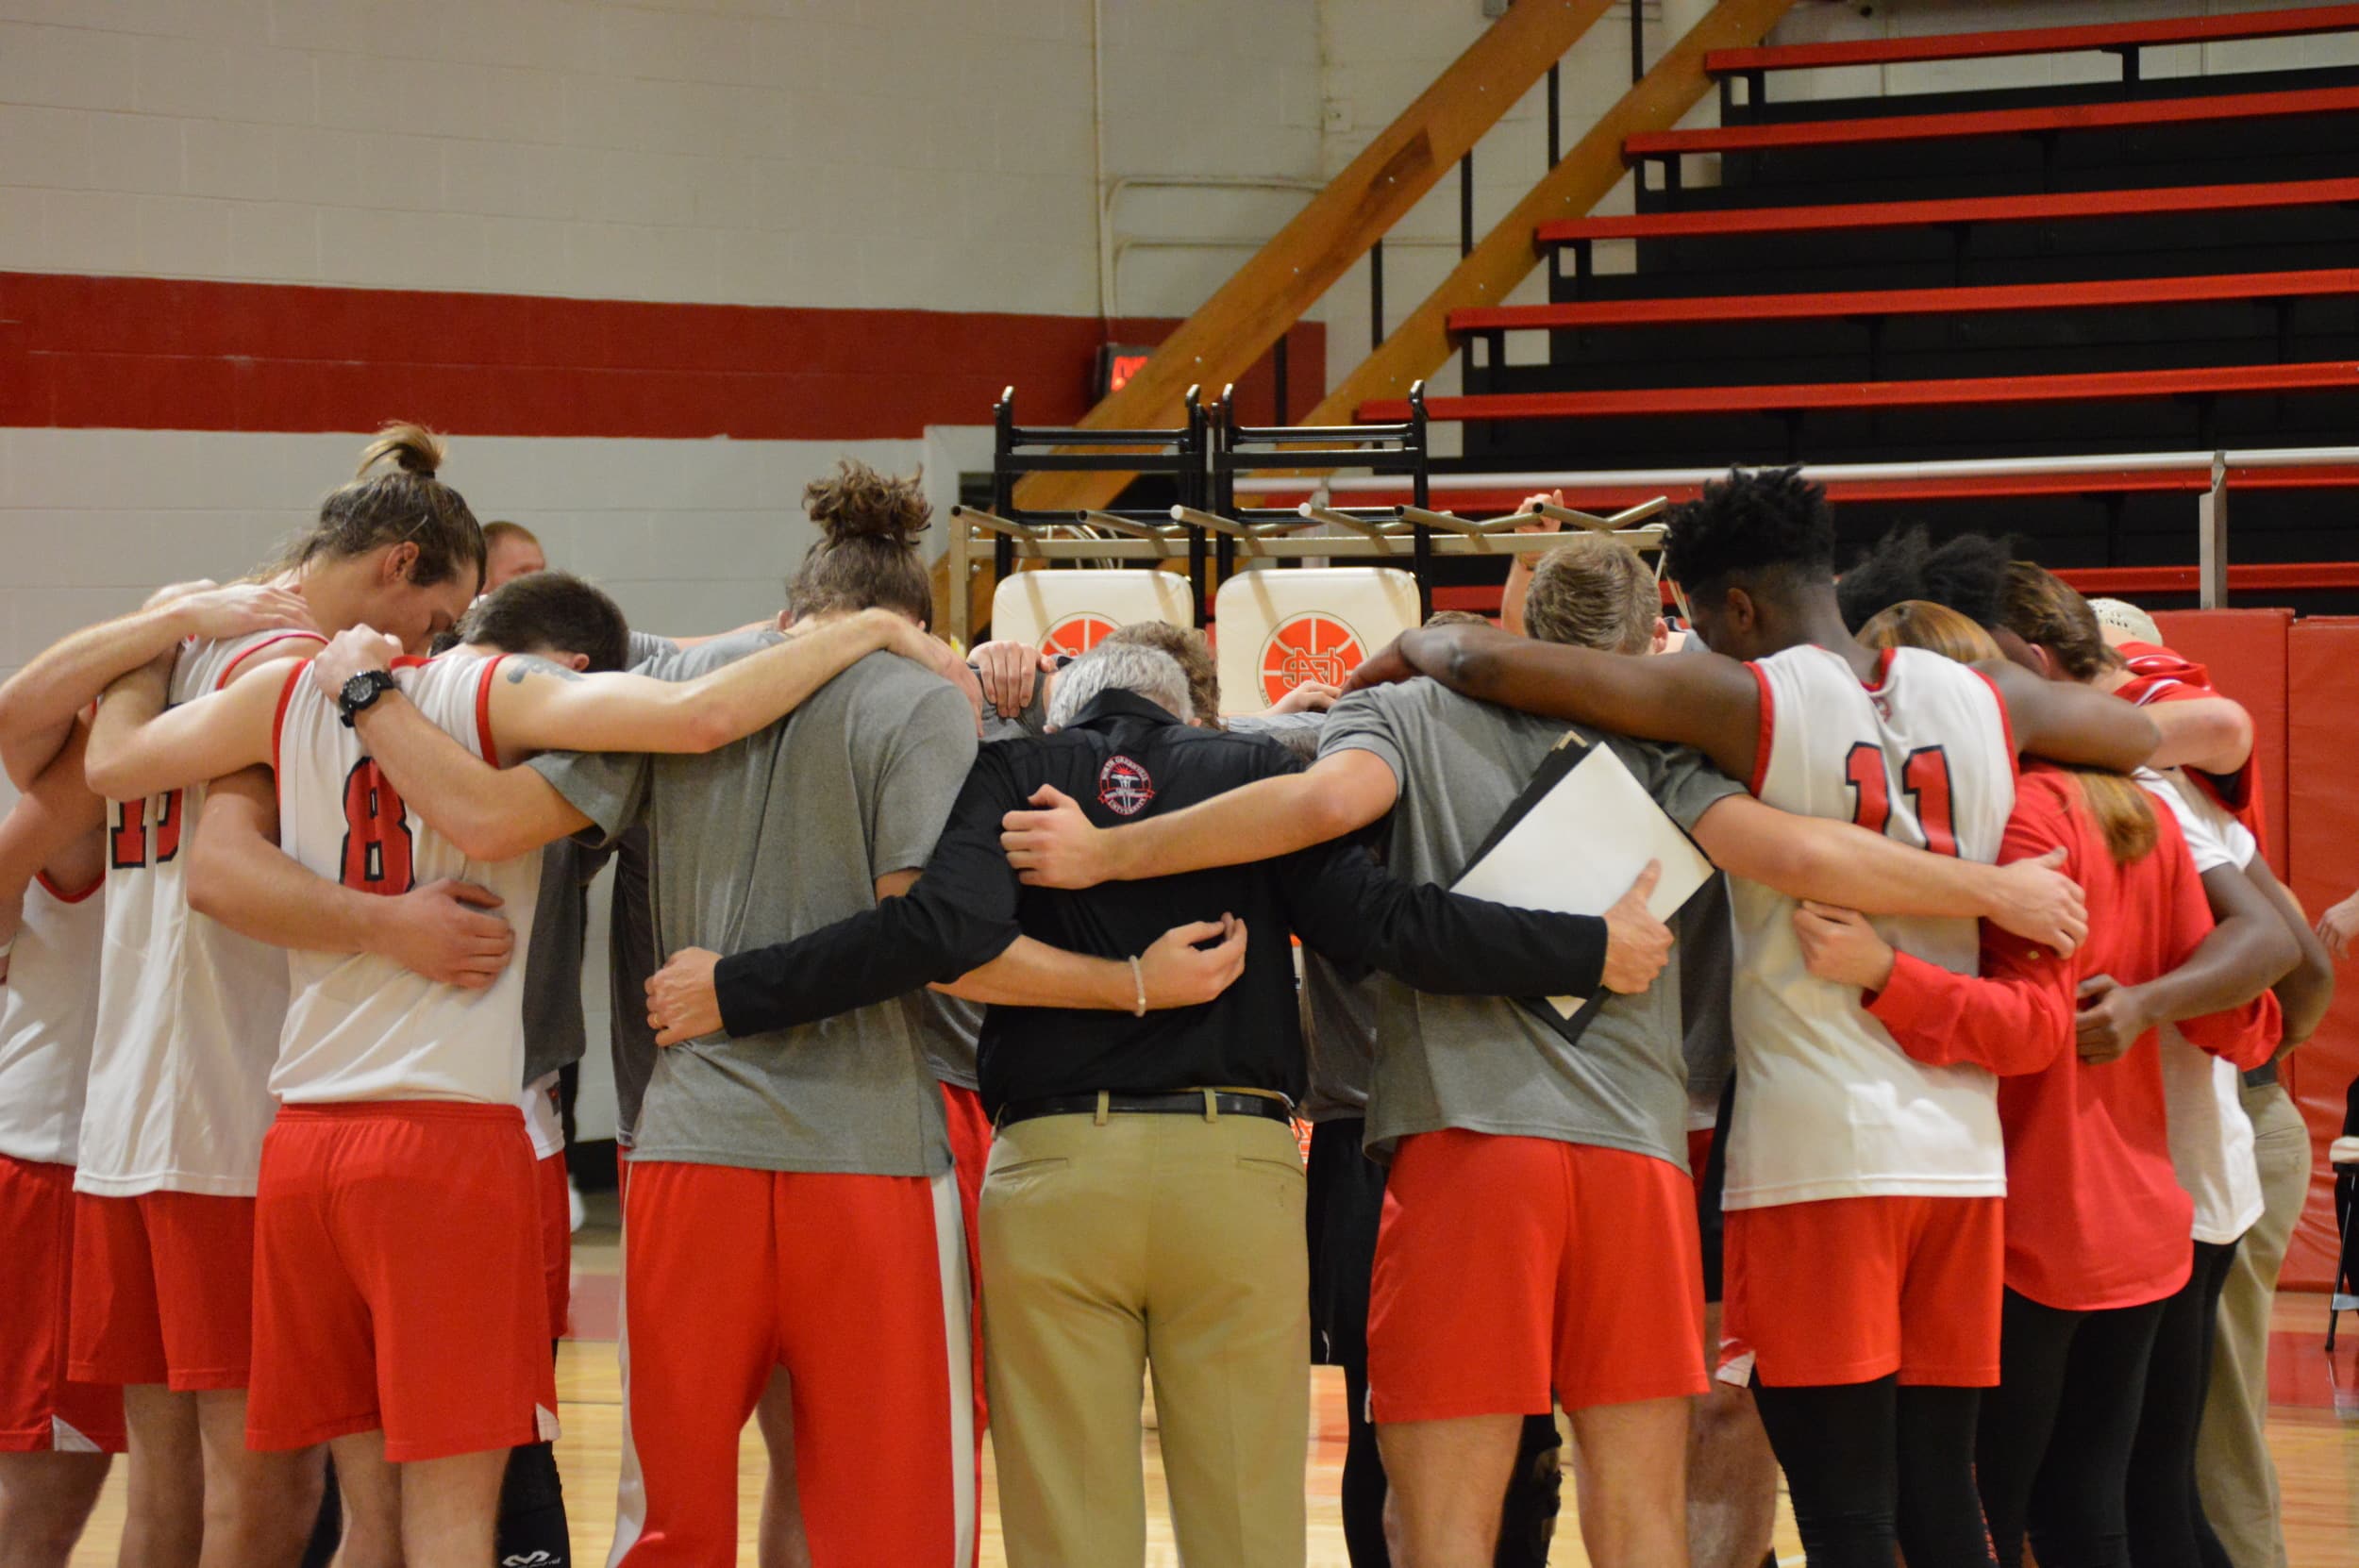 The team, along with the coaches, say a prayer after the game is over.